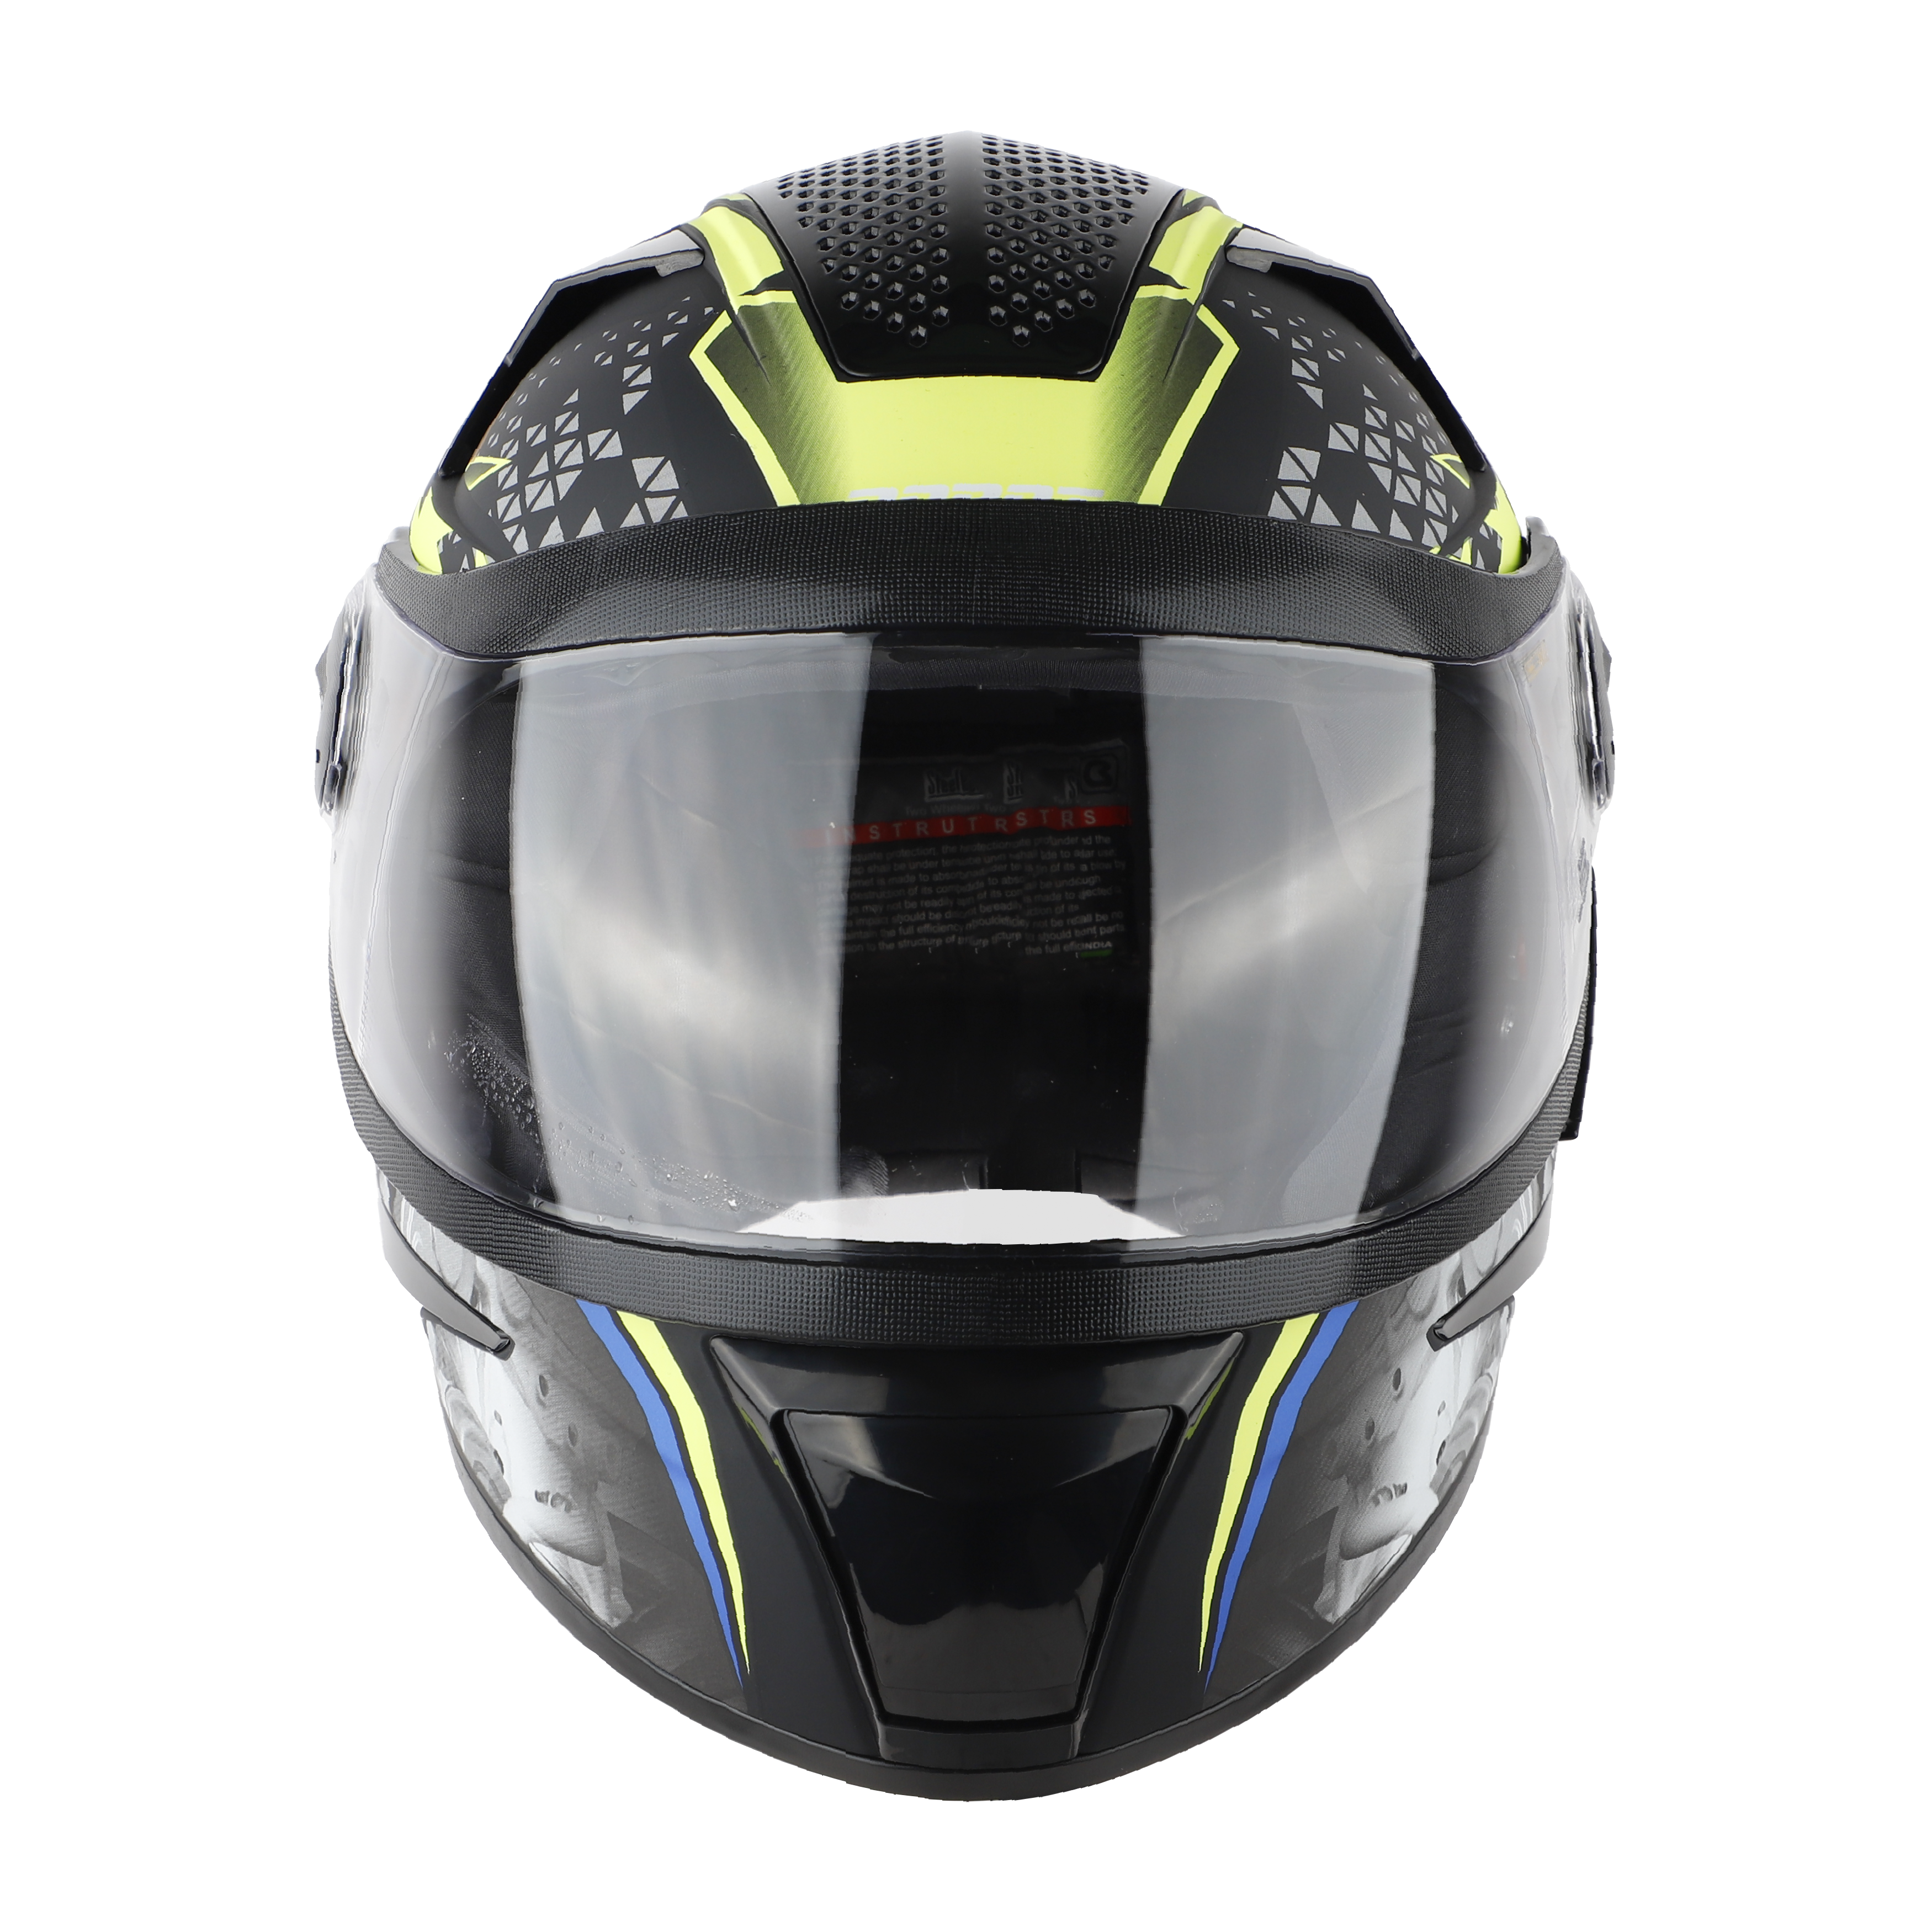 Steelbird SBH-17 Ignimeter Full Face ISI Certified Graphic Helmet (Glossy Black Blue With Clear Visor)